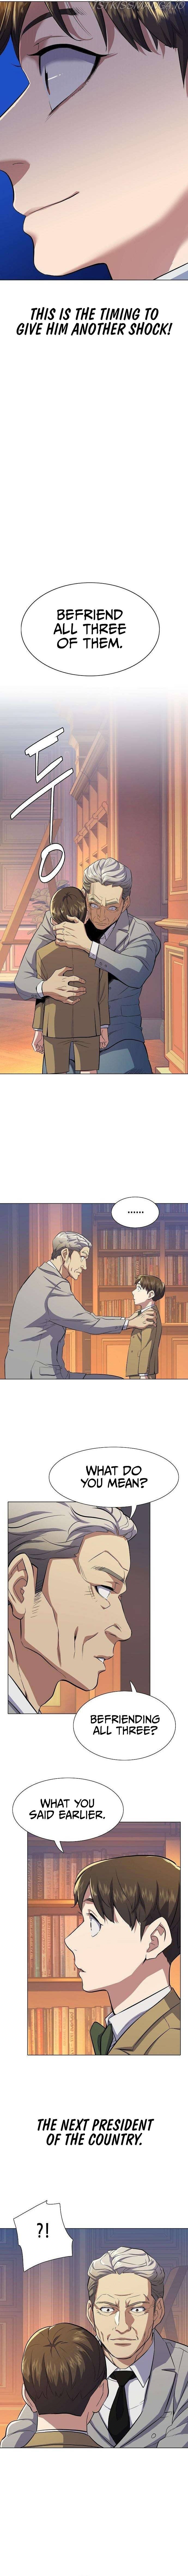 The Chaebeol’s Youngest Son chapter 3